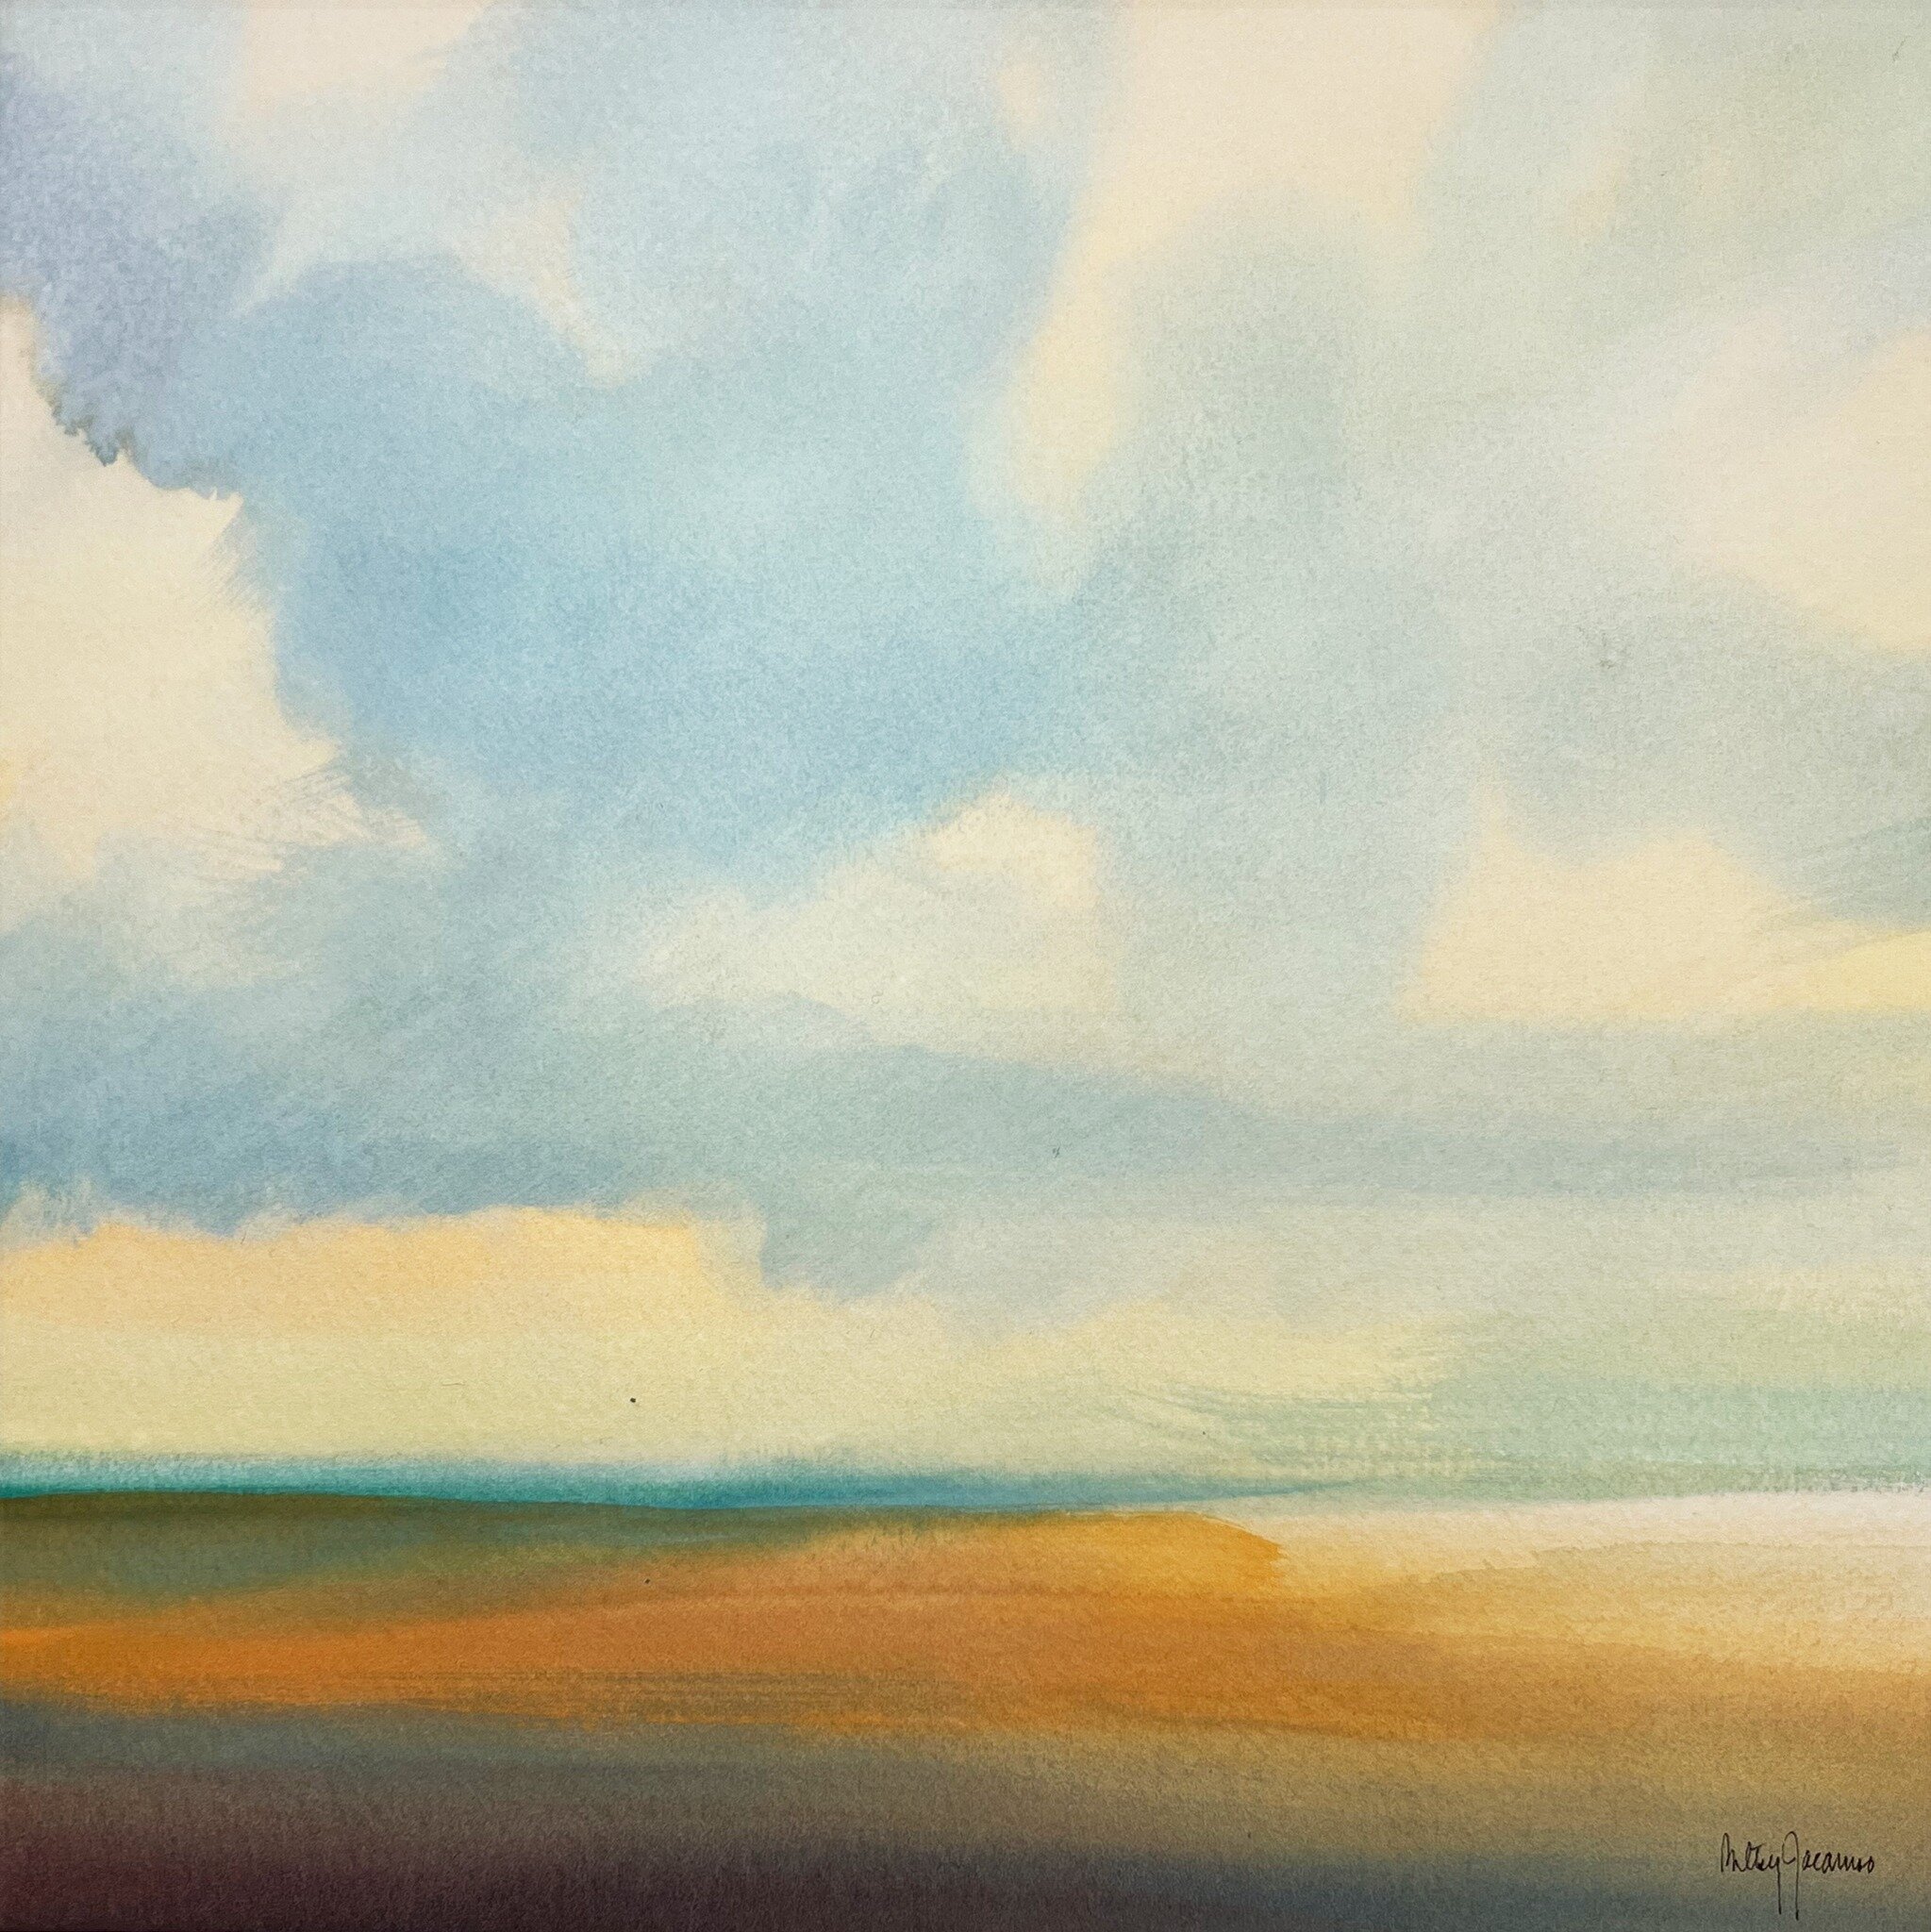 Amber Dream, watercolor on Arches 140#, 10 x 10 in. Matted. Betsy Jacaruso.